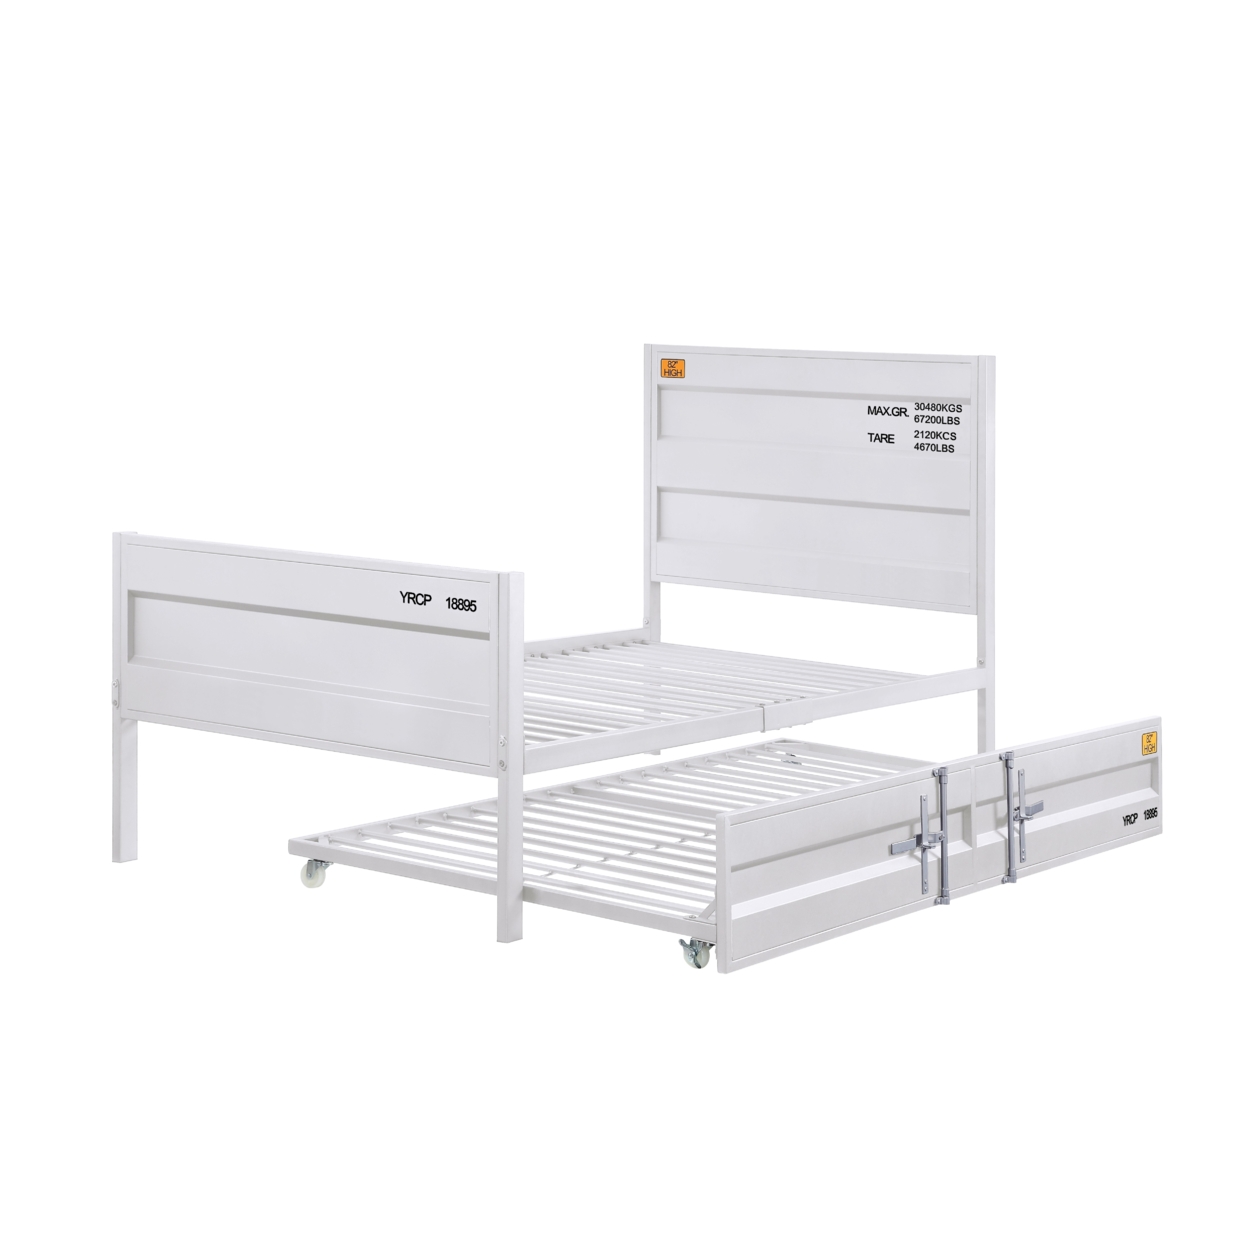 Industrial Style Metal Twin Size Bed With Straight Leg Support, White- Saltoro Sherpi